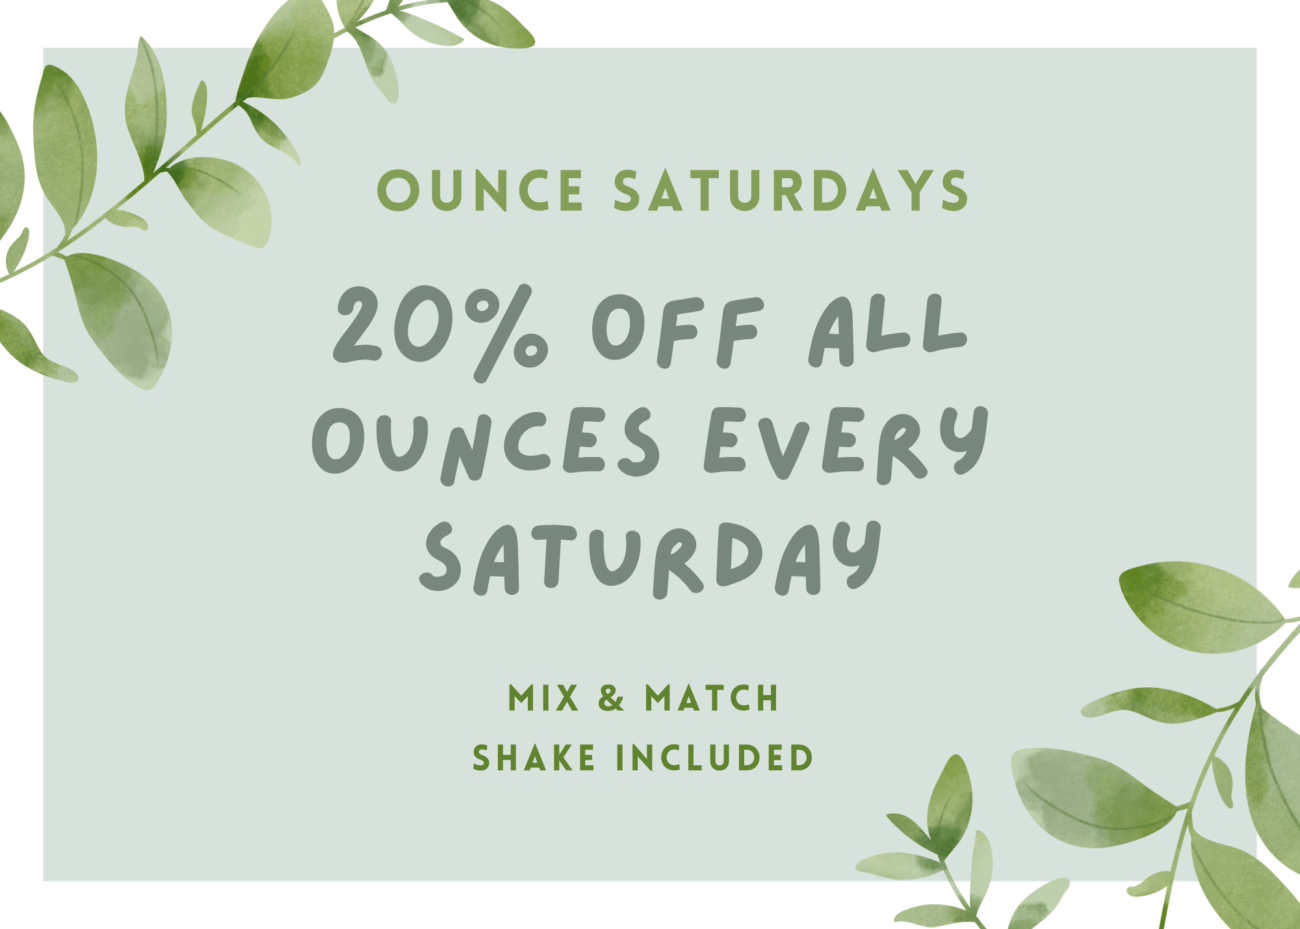 Start your weekend off right with discounted ounces every Saturday! Shake is included in the discount and you can mix & match strains.